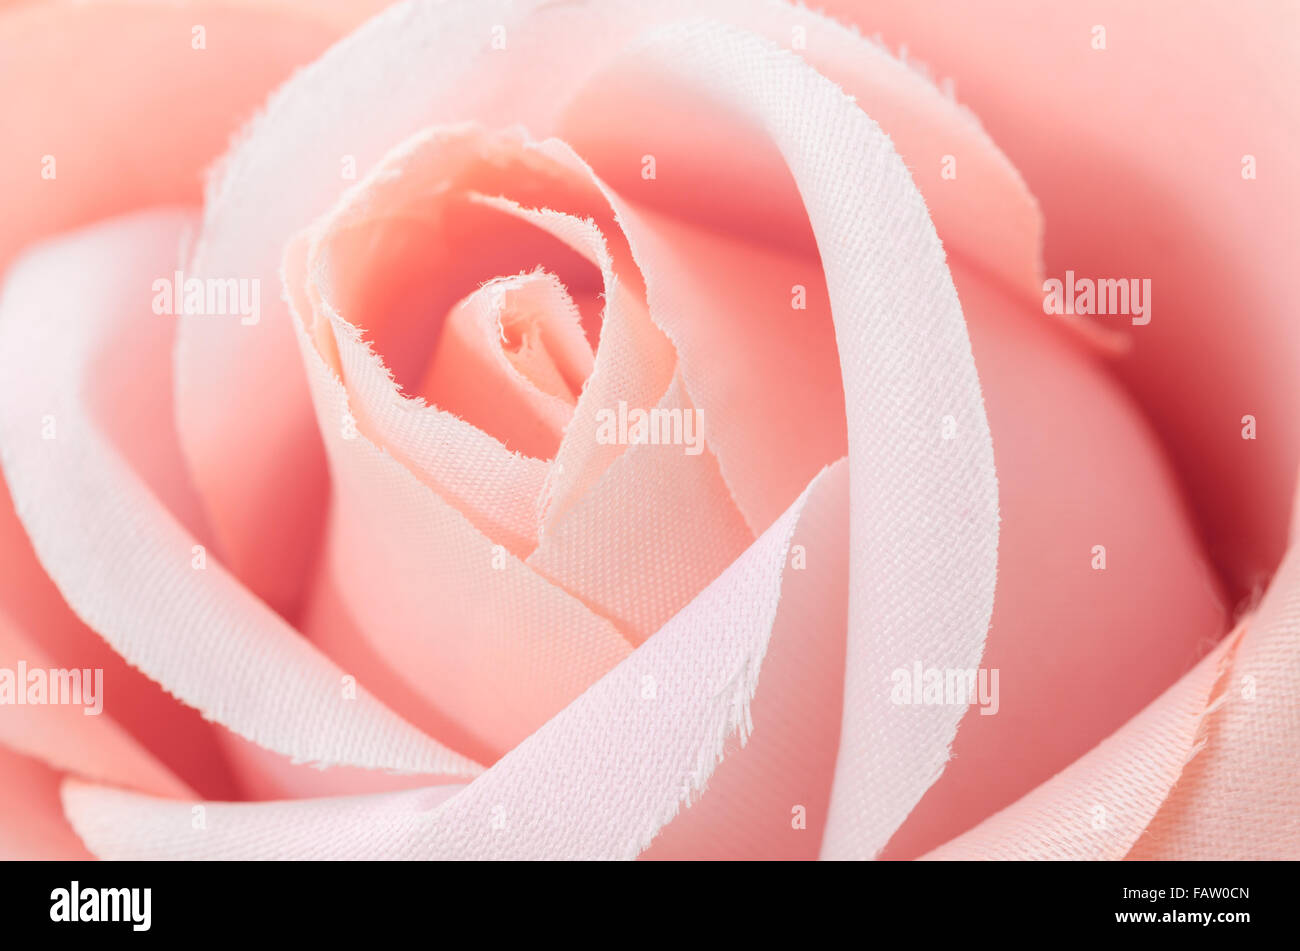 center of rose as background. Stock Photo